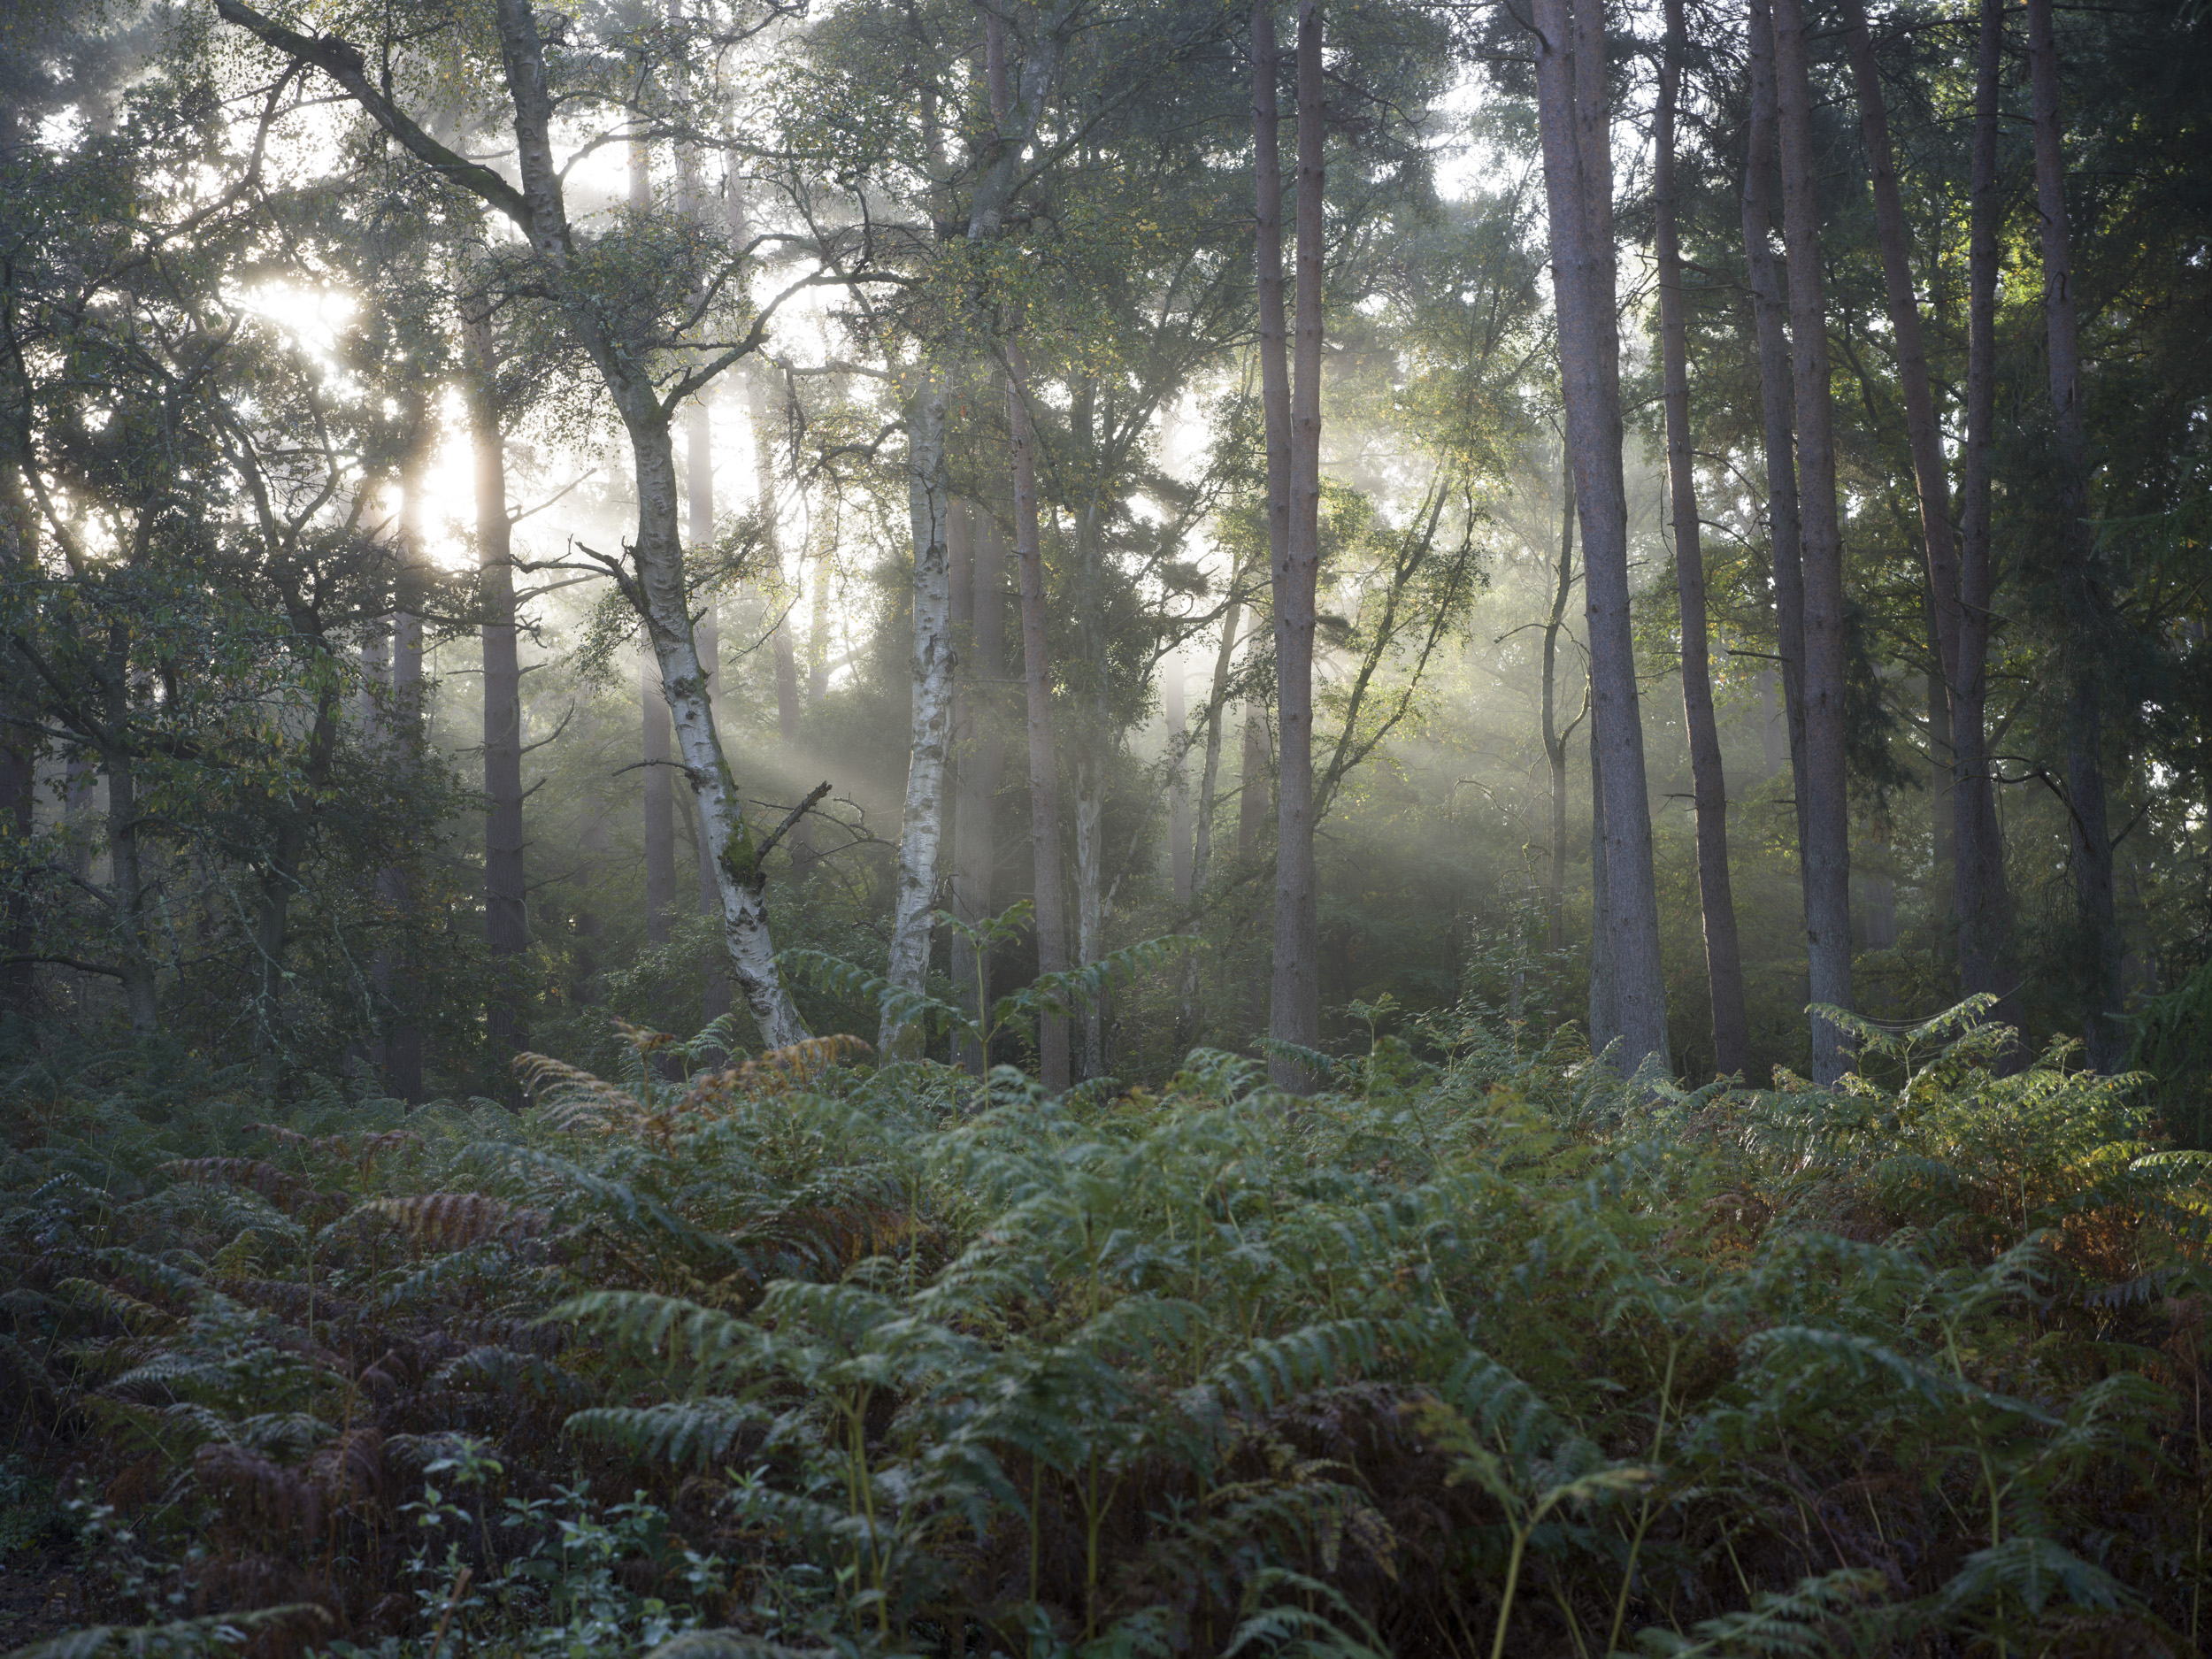 Sample image taken with the Hasselblad X2D 100C of a forest with misty morning light